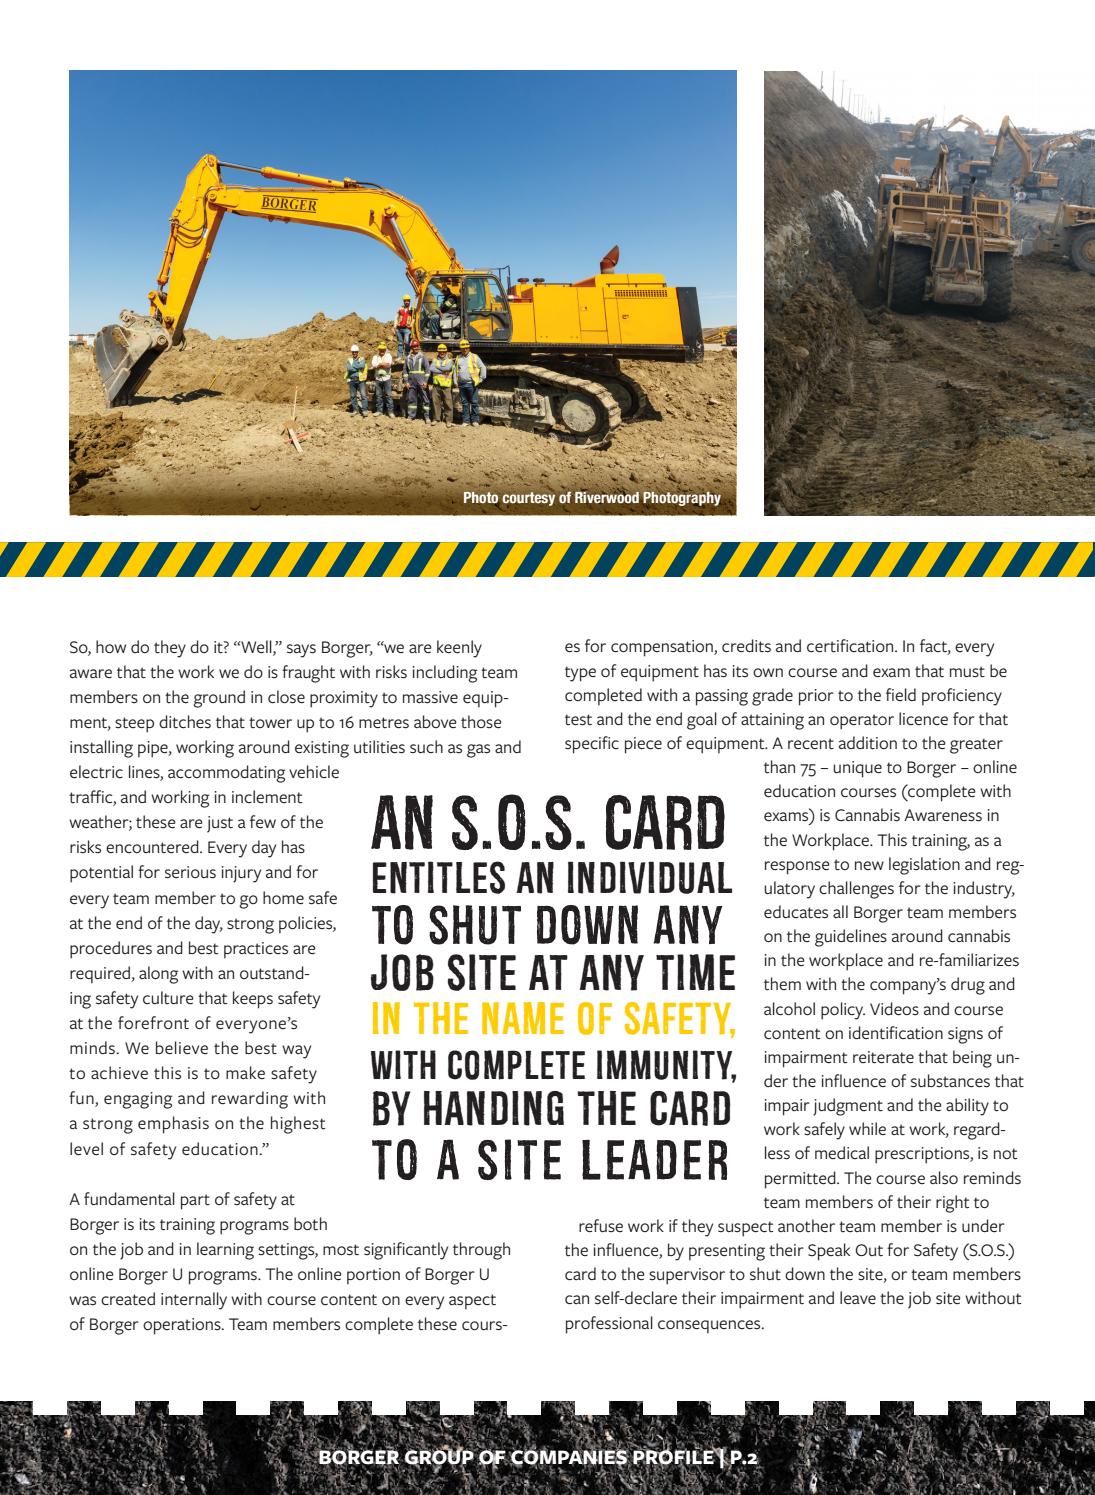 Business in Calgary Magazine - Business Profile for Borger Group